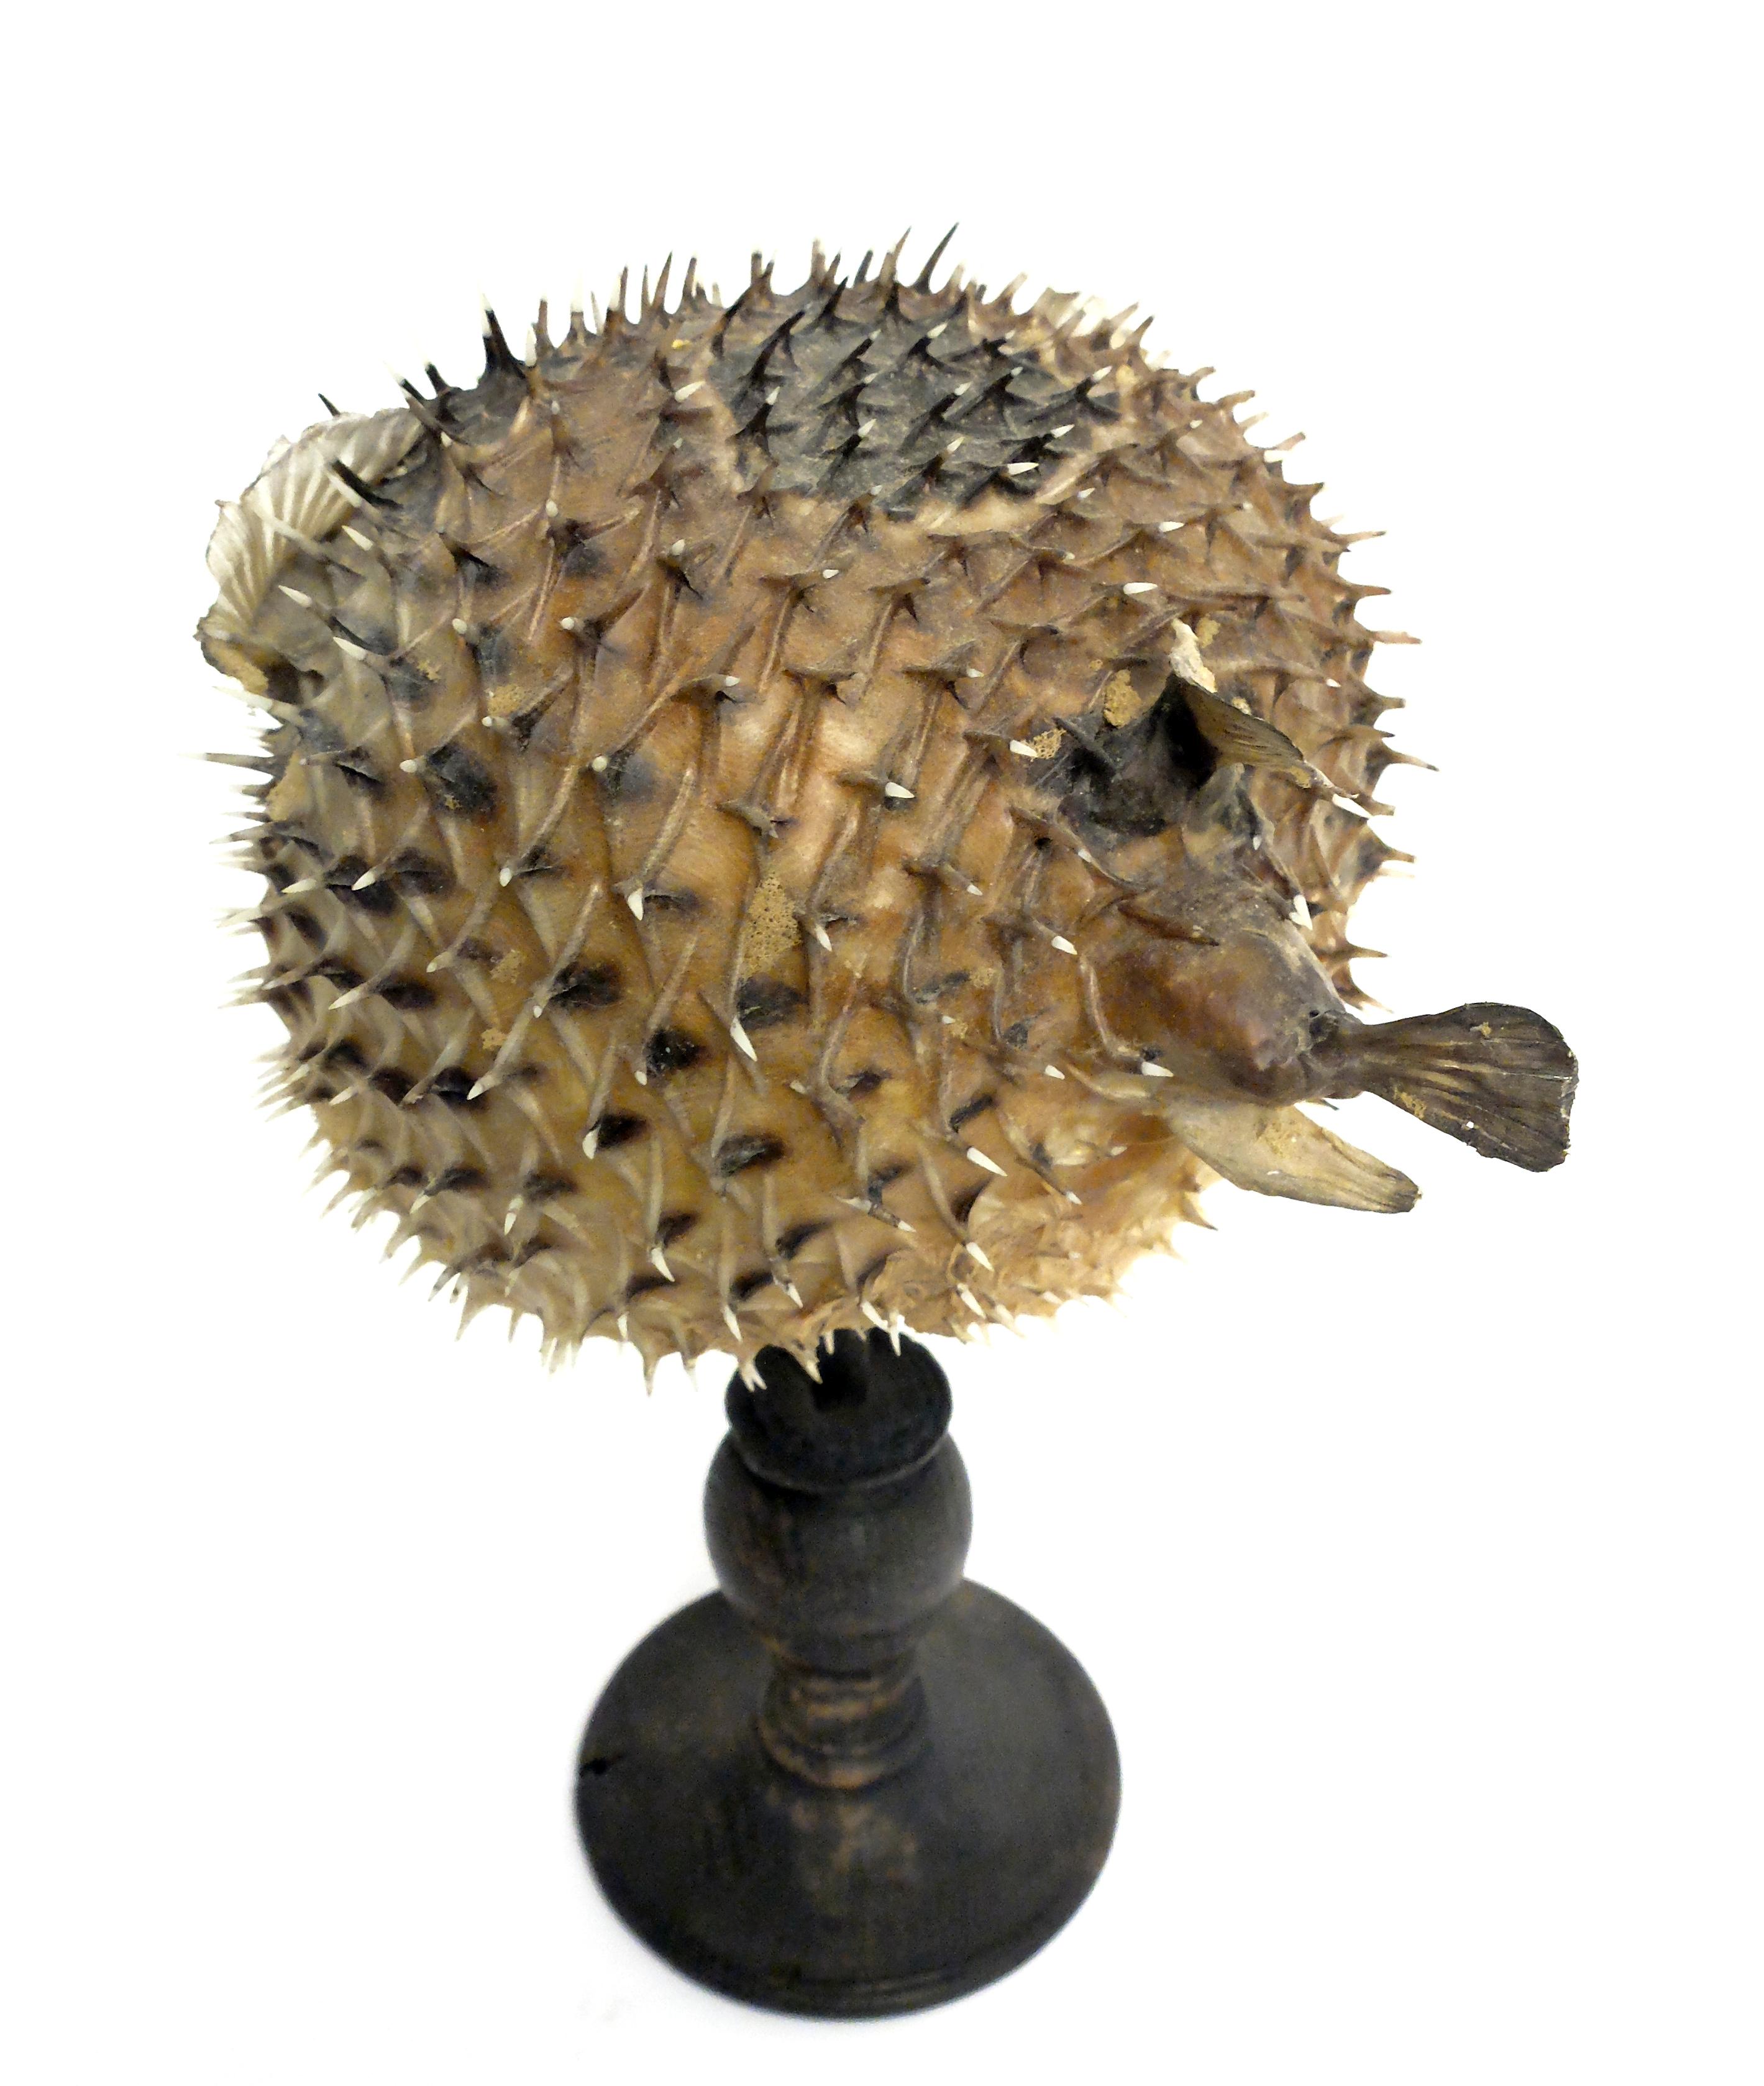 Italian 19th Century Wunderkammer Marine Natural Taxodermie Specimen of a Porcupine Fish